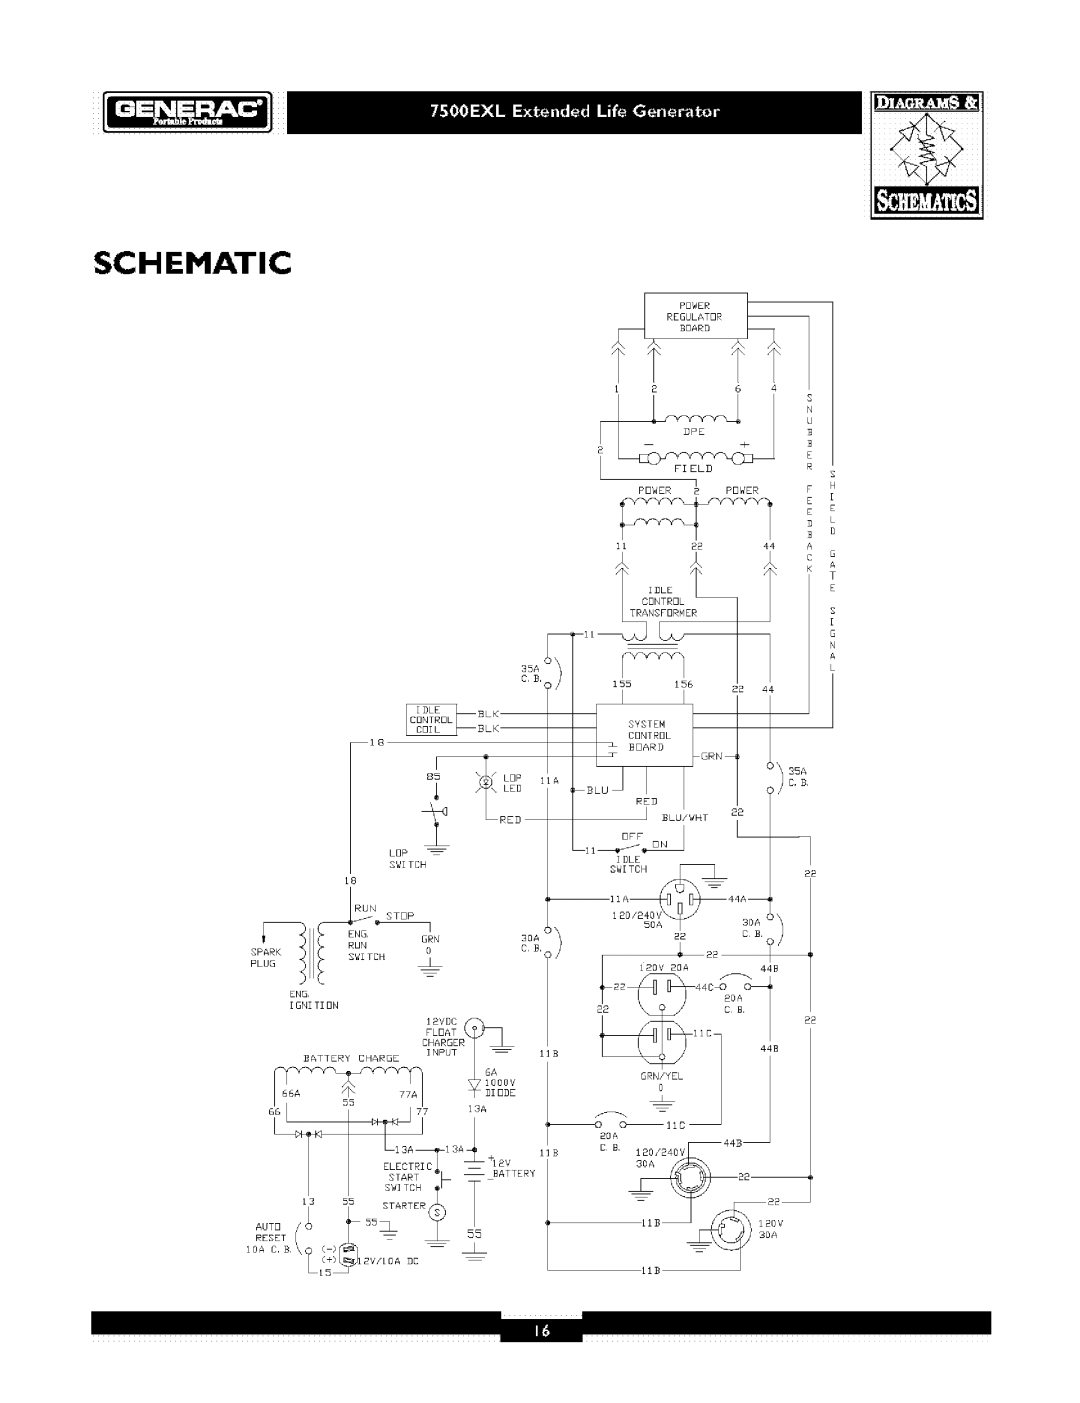 Generac 1019-3 owner manual Schematic, G A T E S I G N, Lop S Itch, PDWER 2 PDWER, 155156, Idle 